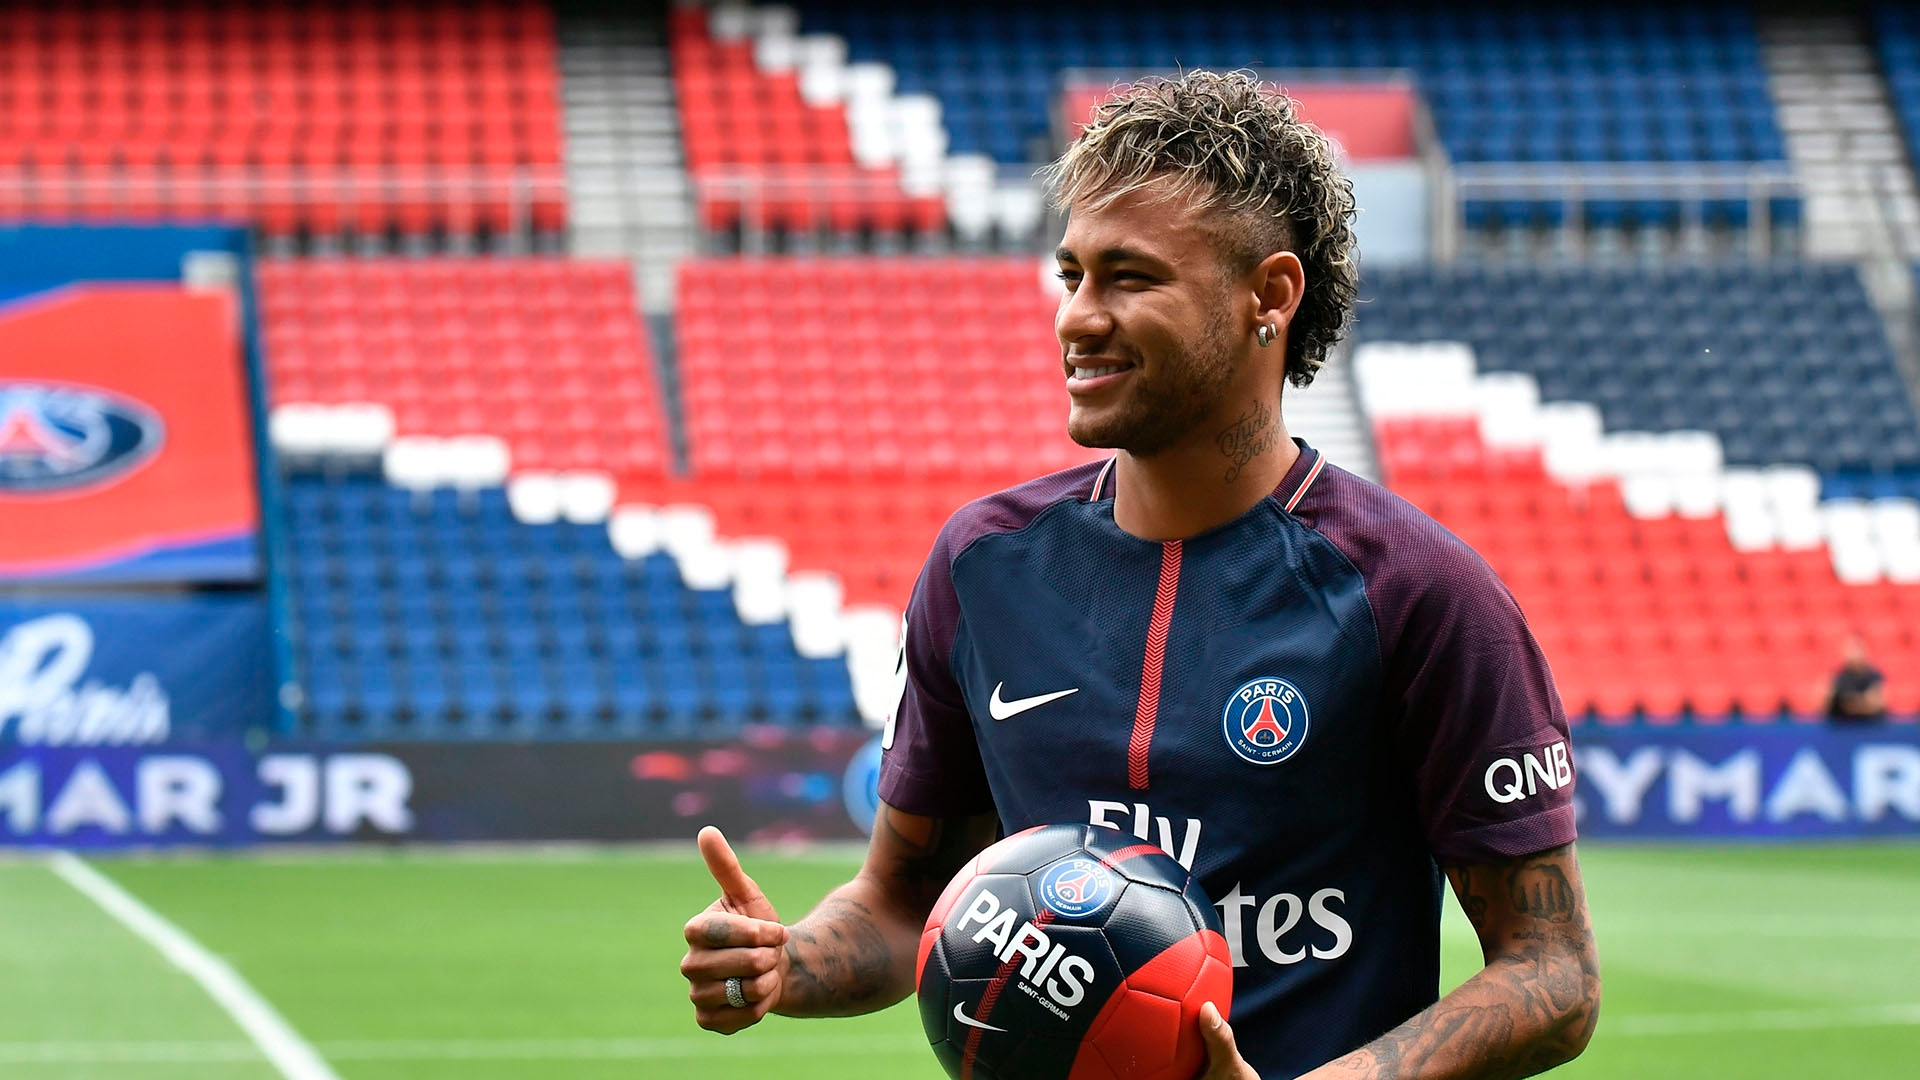 1920x1080 Why Neymar could end up at Real Madrid one day | US